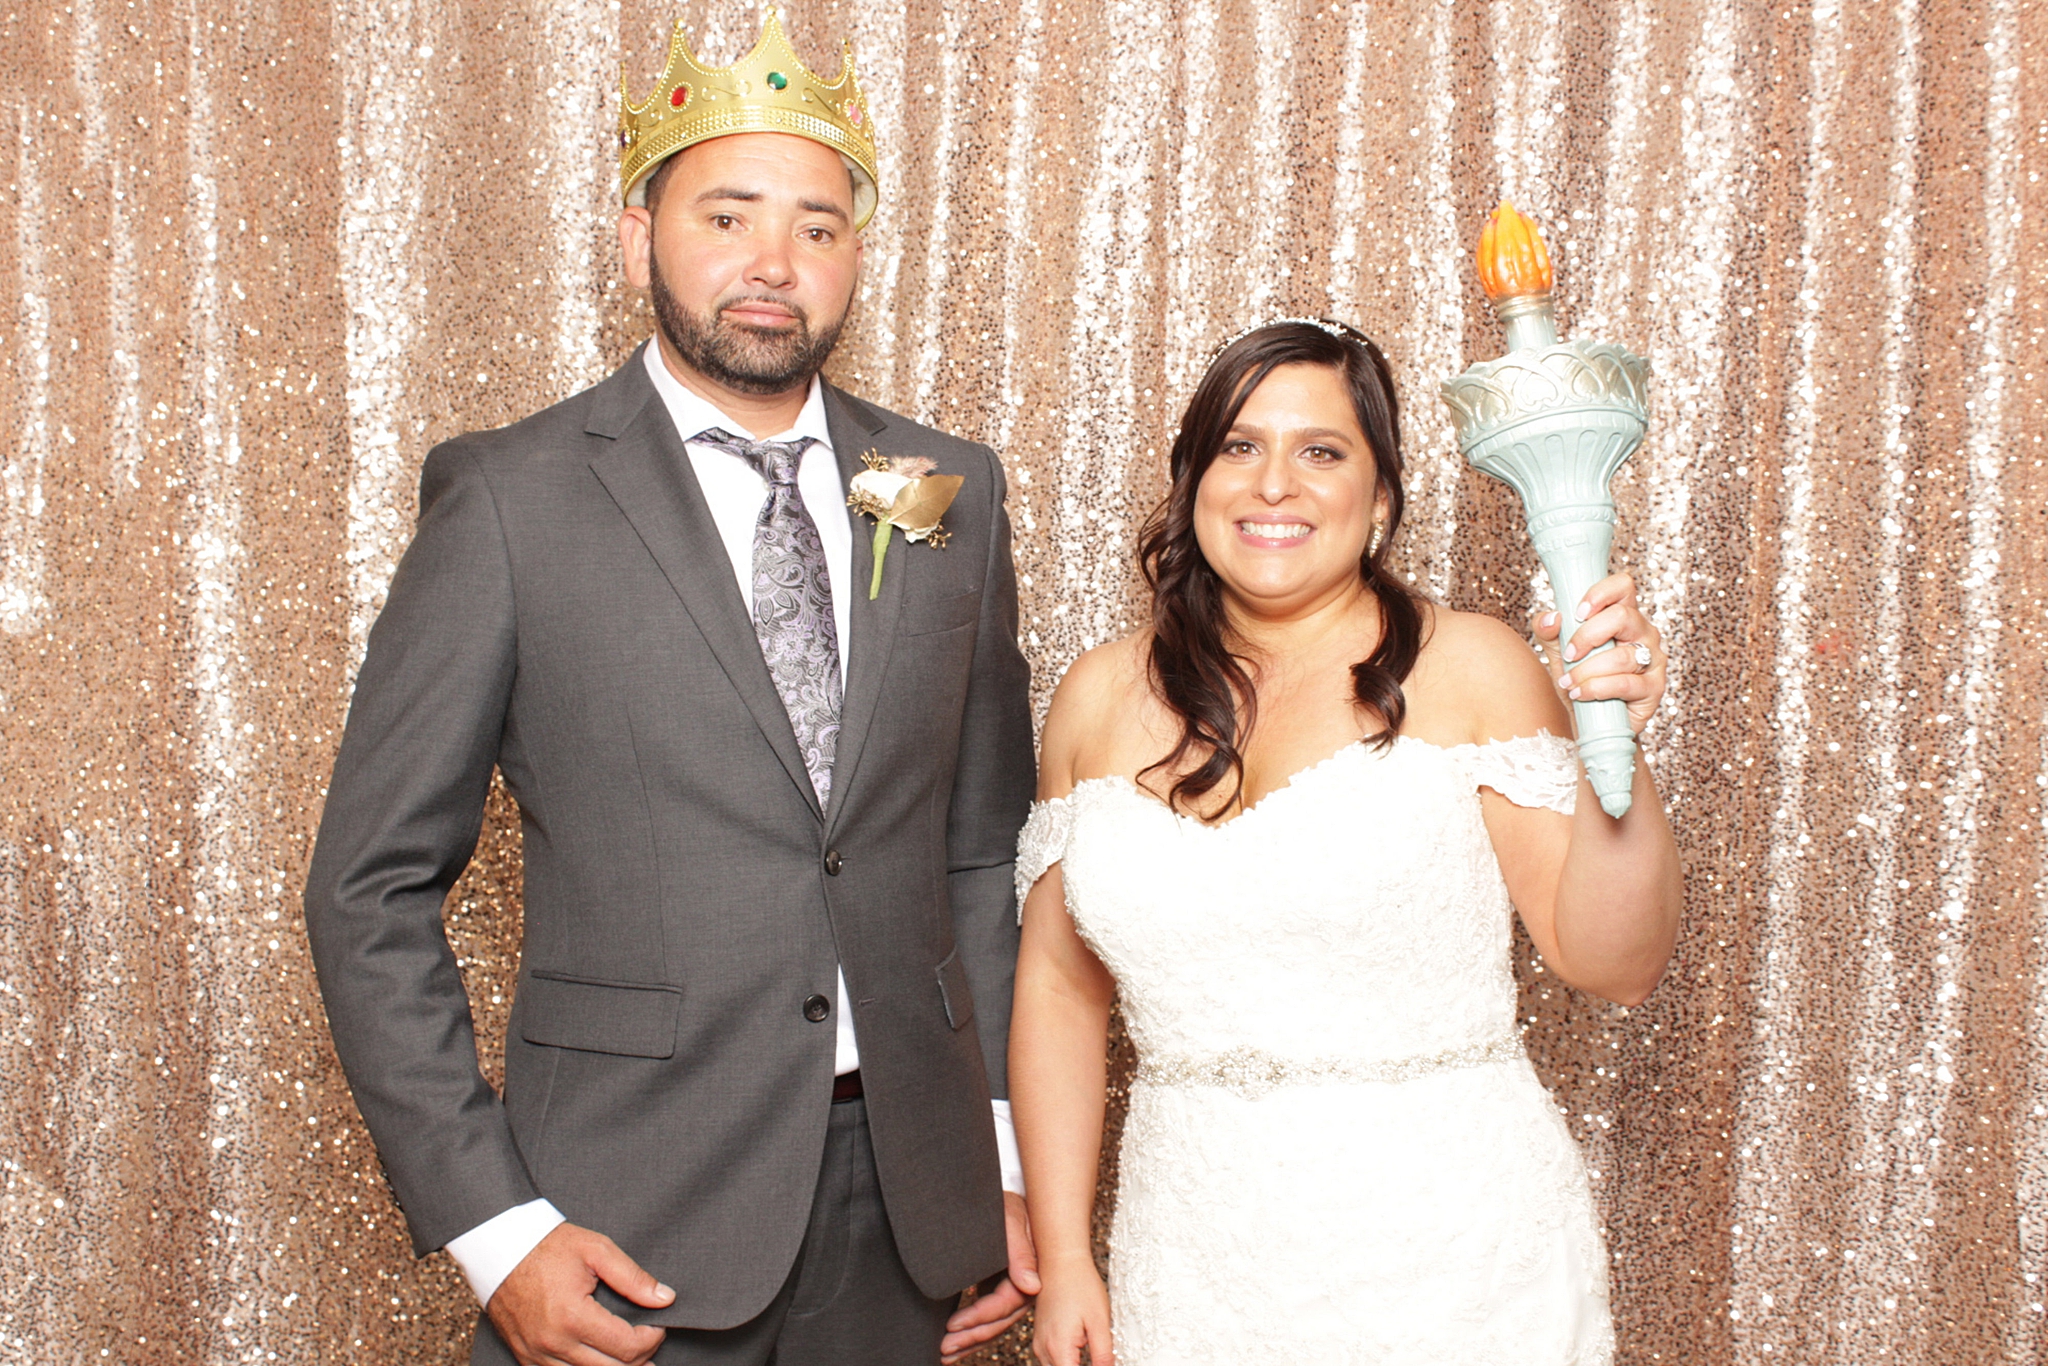 bride and groom pose in photo booth